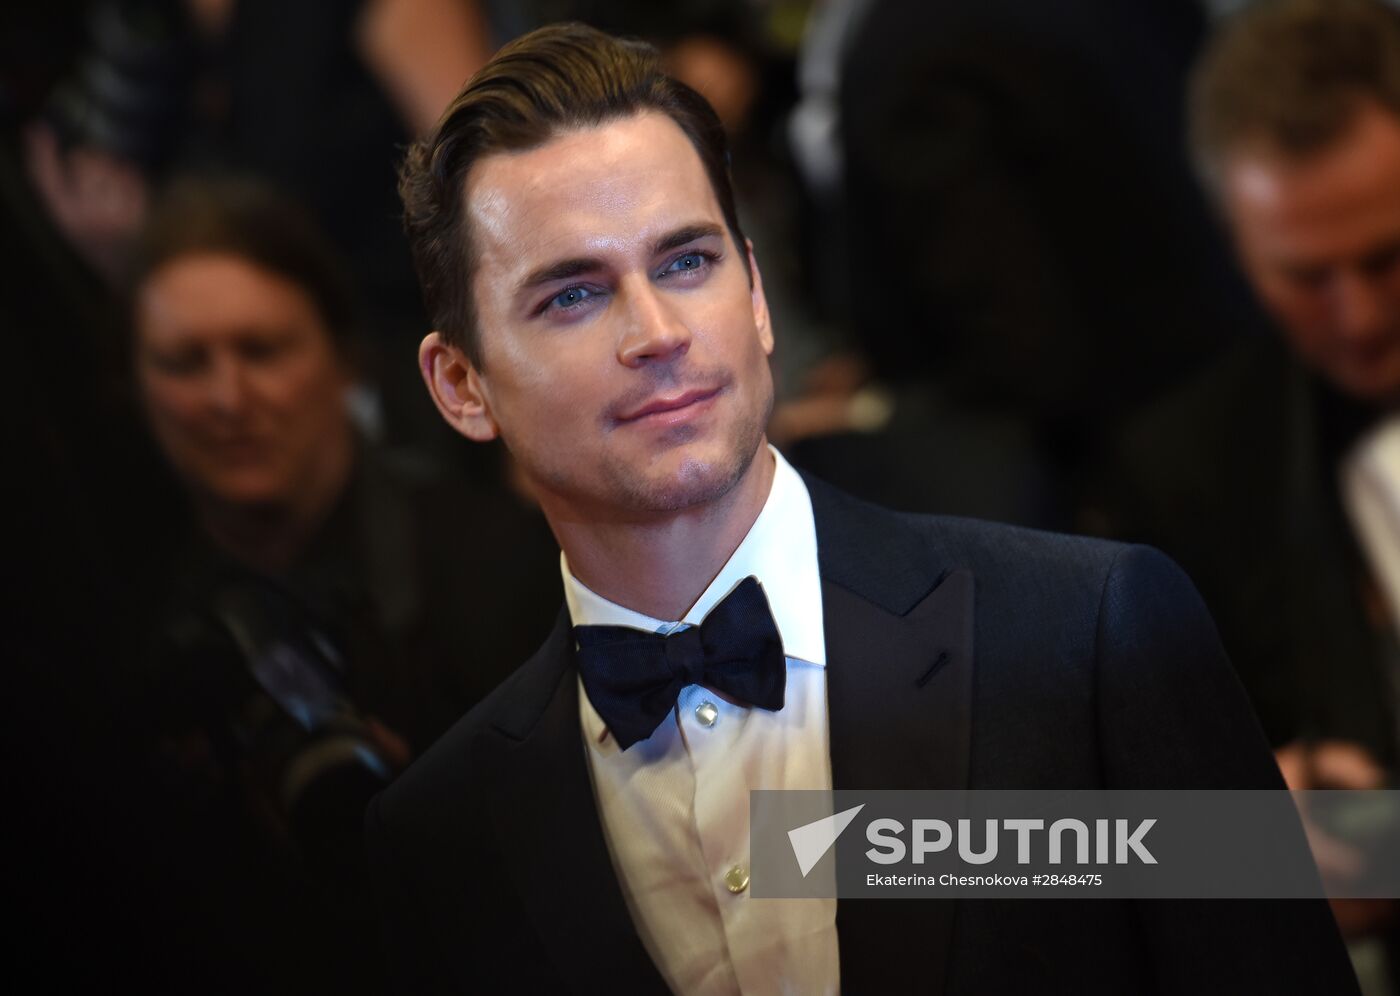 69th Cannes Film Festival. Day Four